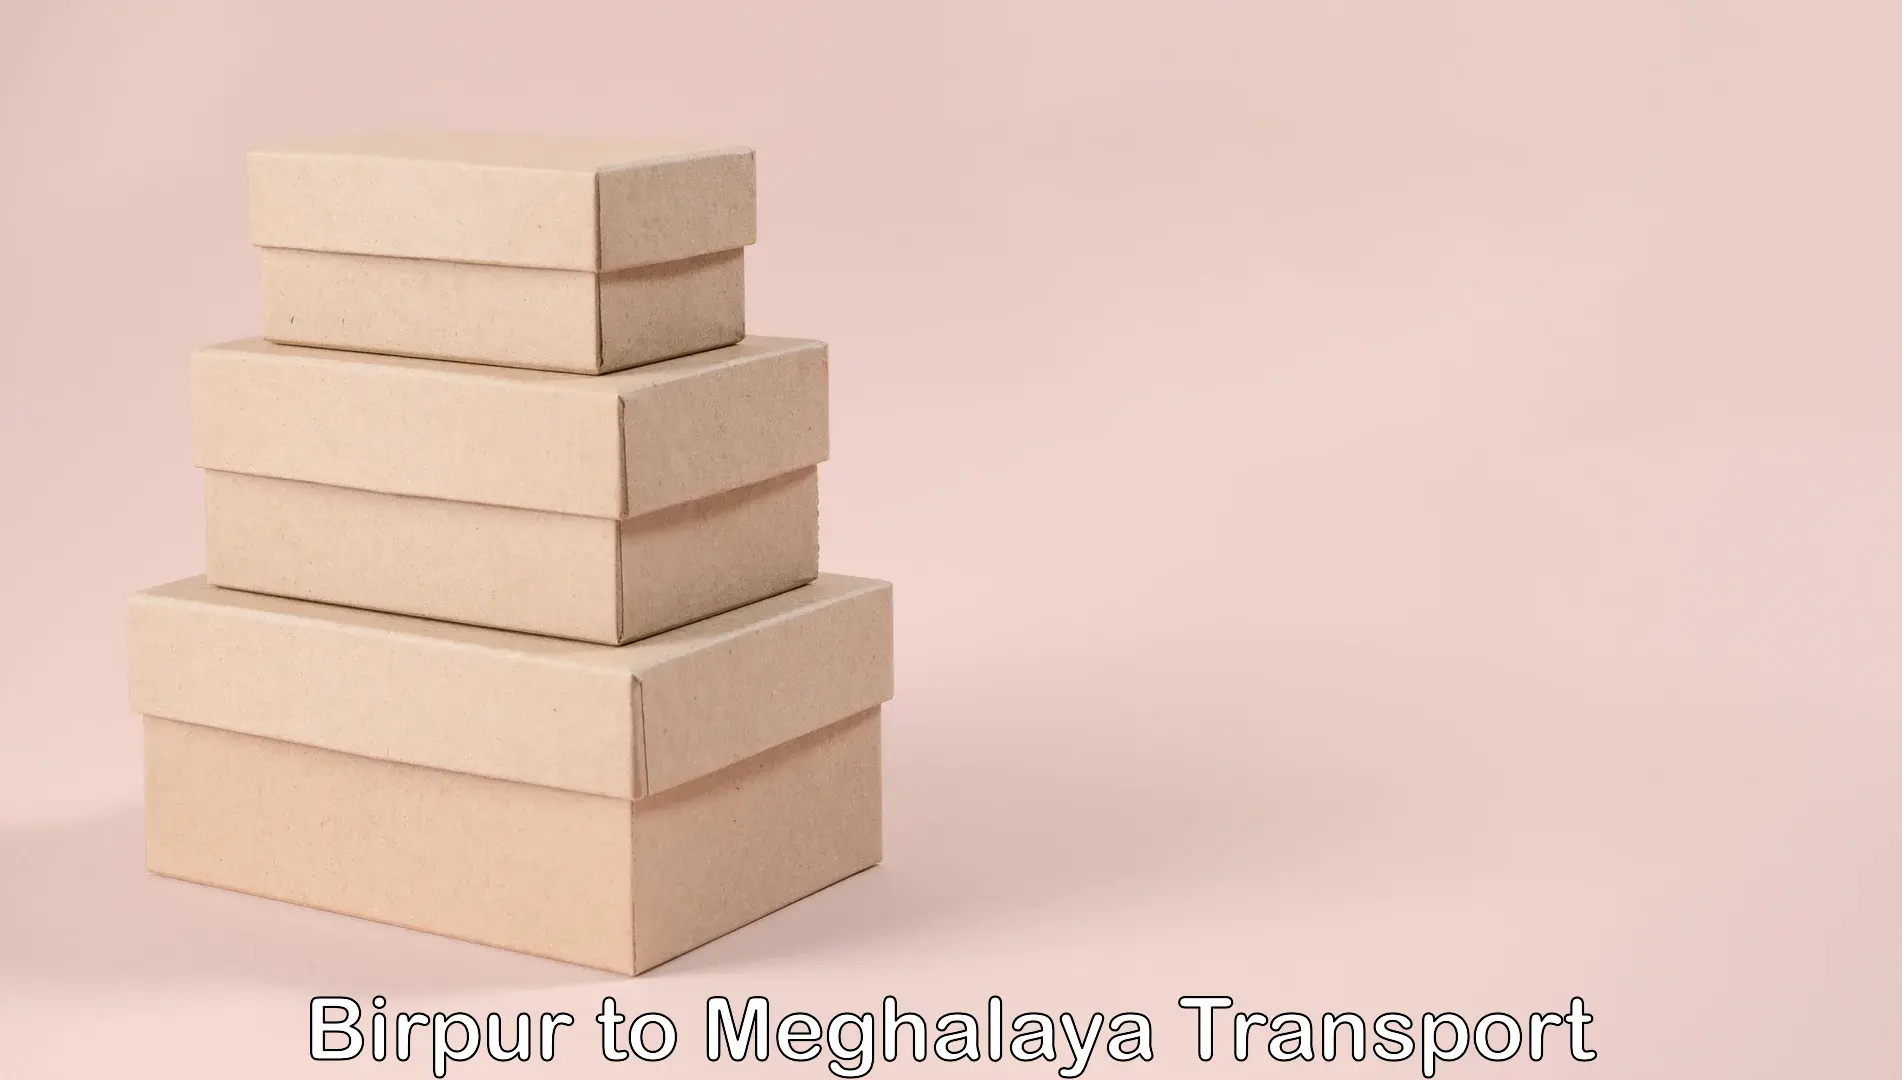 Air freight transport services Birpur to Meghalaya